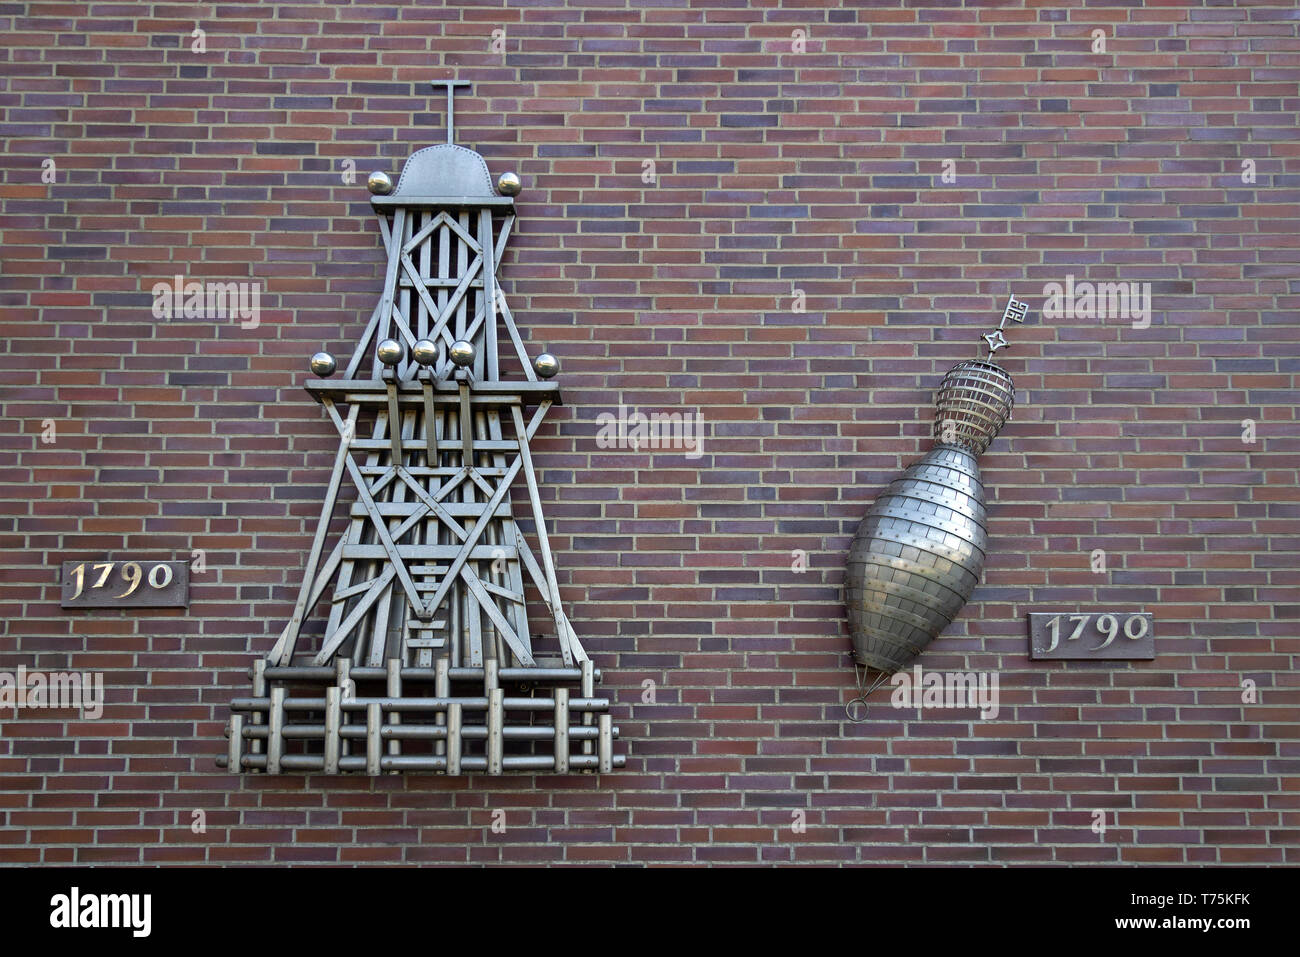 sculptures of Bremer Bake and Schluesseltonne of 1790 at the wall of the television tower, Bremerhaven, Bremen, Germany Stock Photo